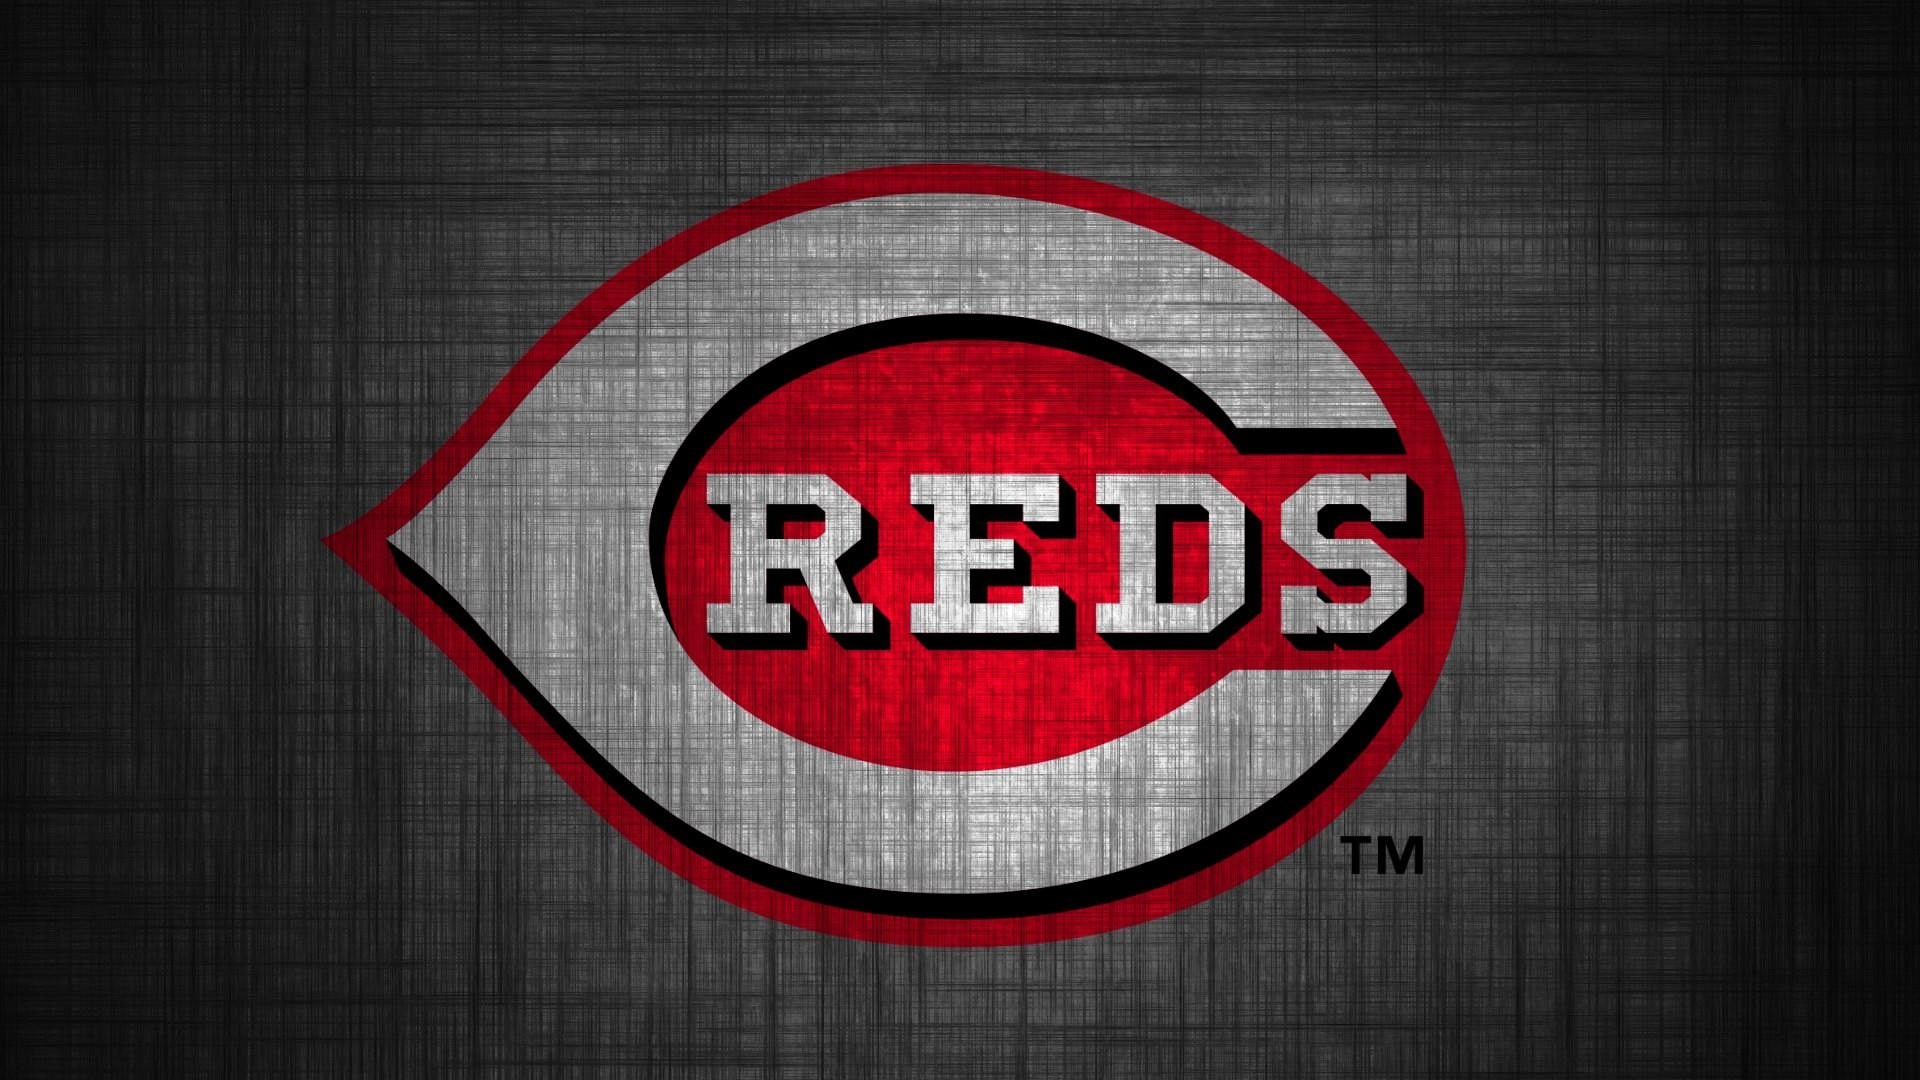 HD Backgrounds Cincinnati Reds MLB with high-resolution 1920x1080 pixel. You can use this wallpaper for Mac Desktop Wallpaper, Laptop Screensavers, Android Wallpapers, Tablet or iPhone Home Screen and another mobile phone device